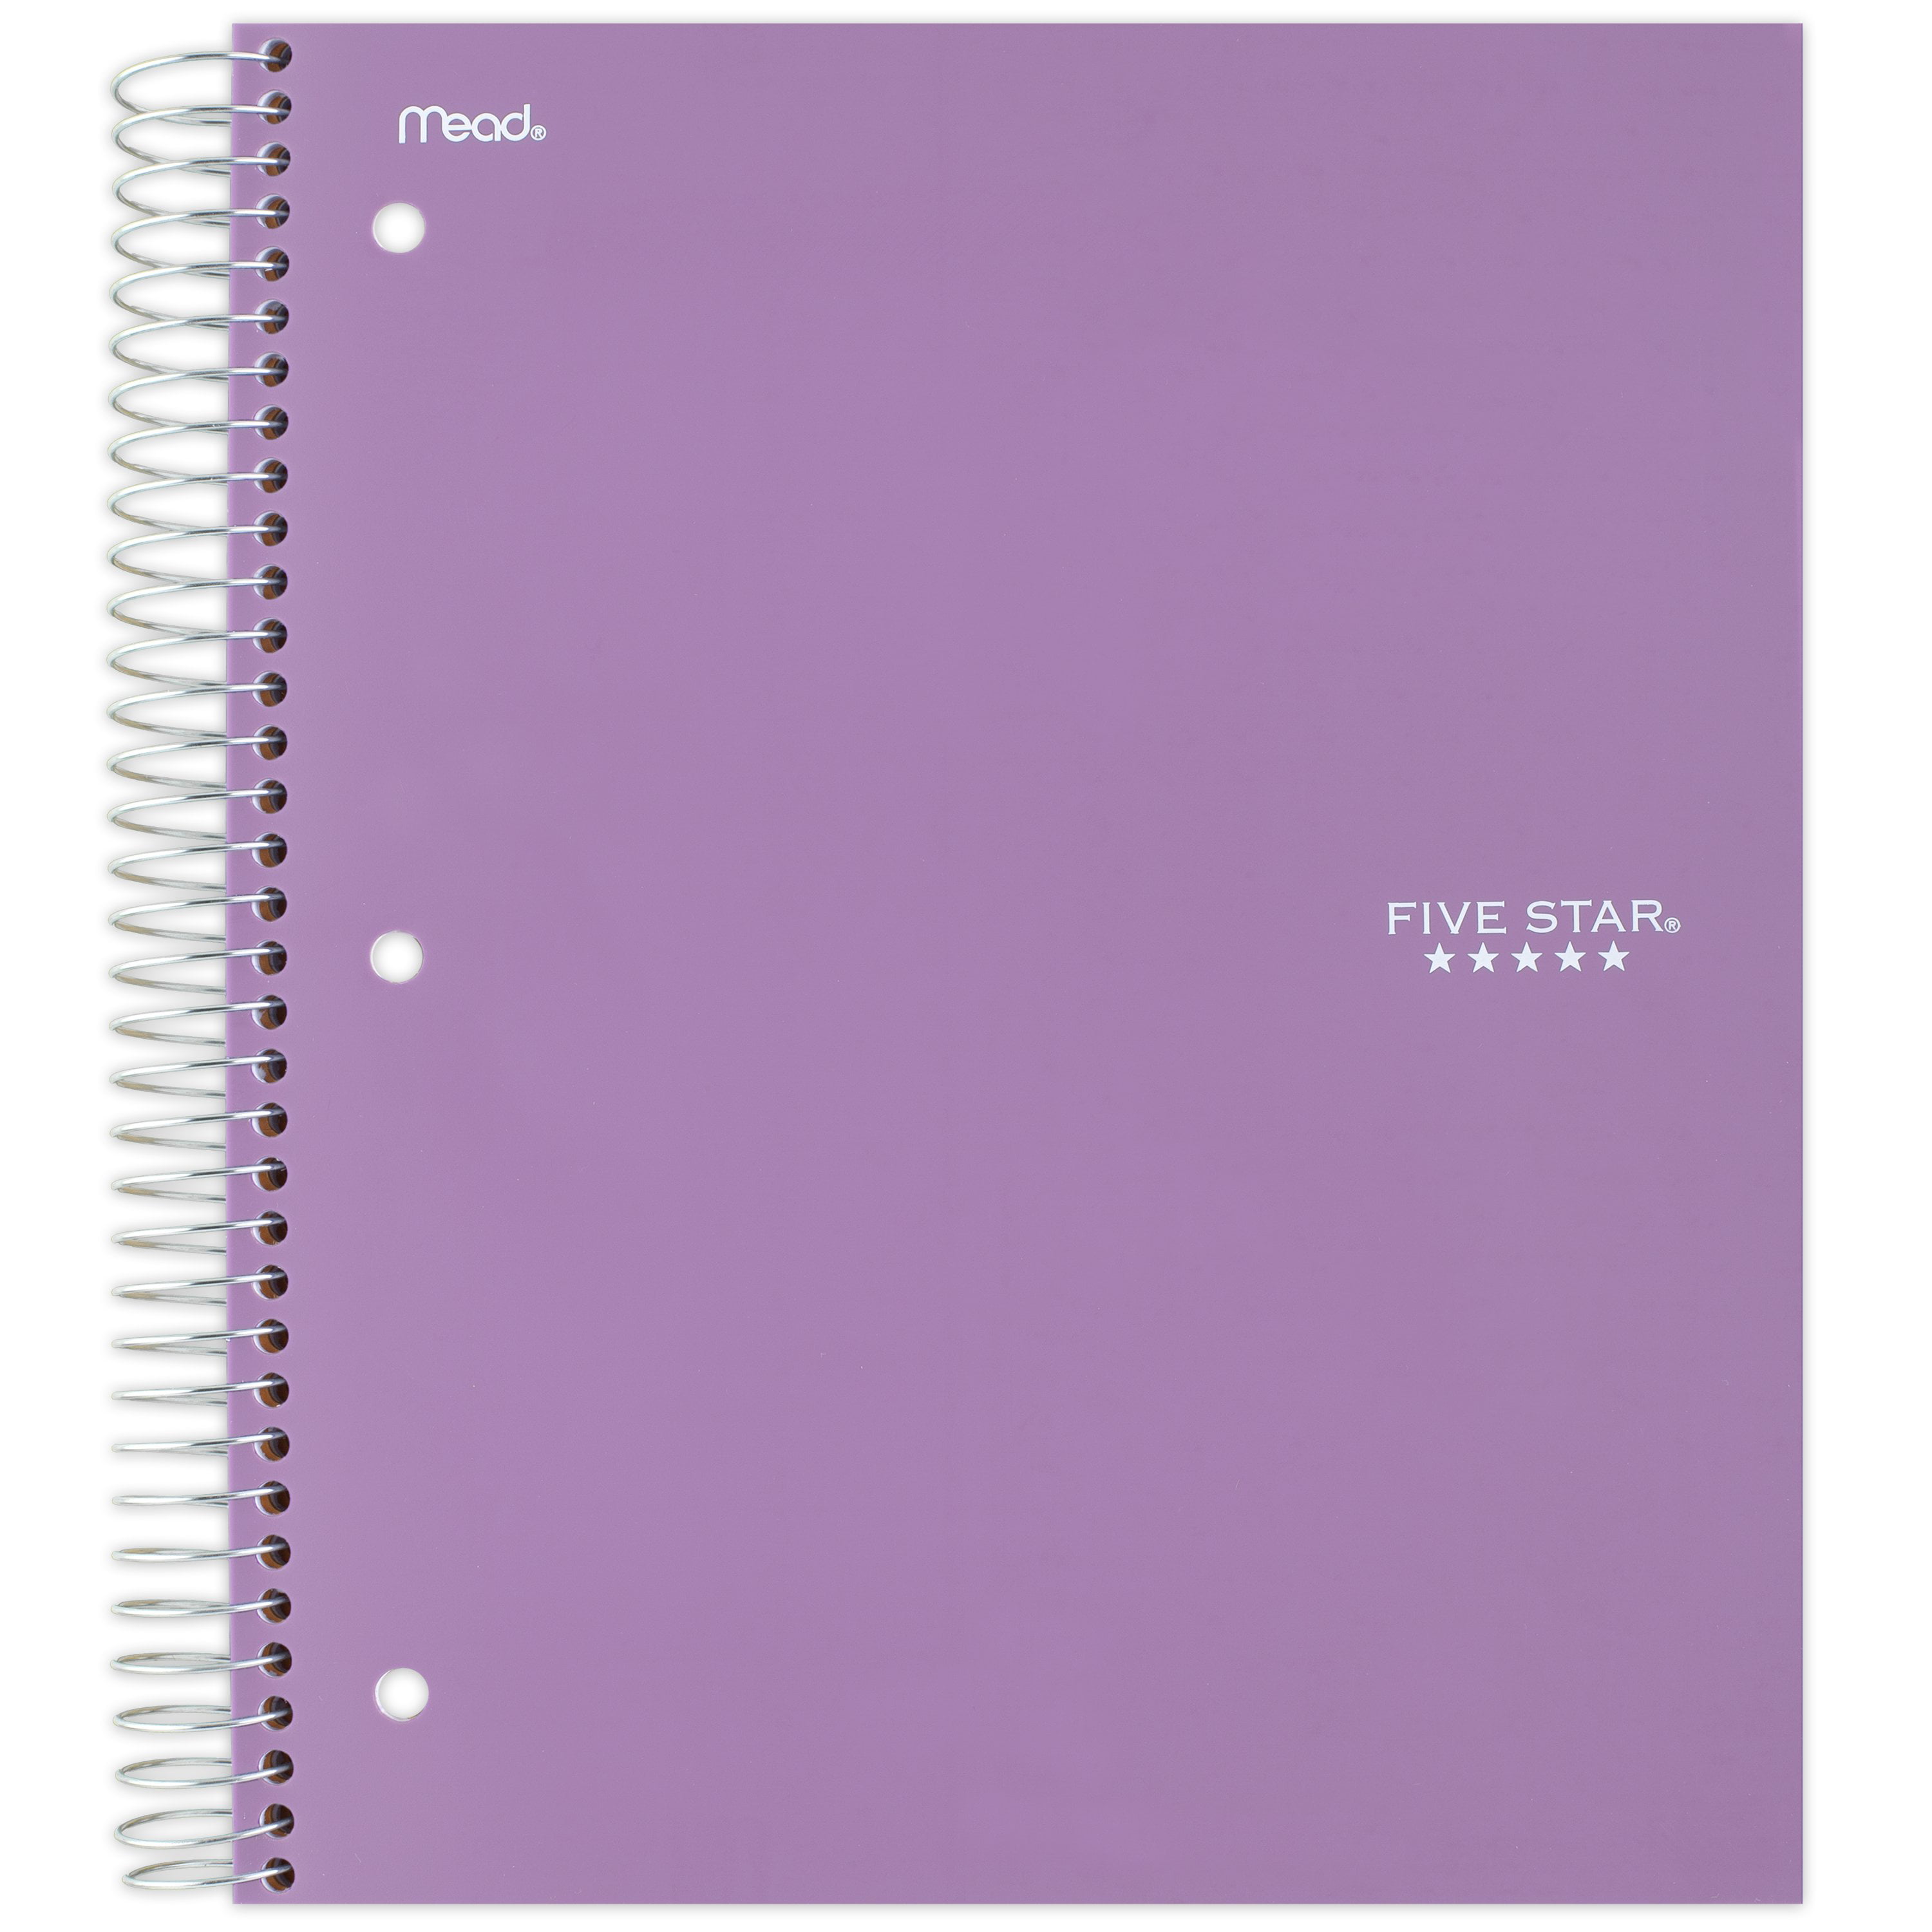 Five Star Advance Spiral Notebook 5 subj College Rules 200 sheets Free Shippin 